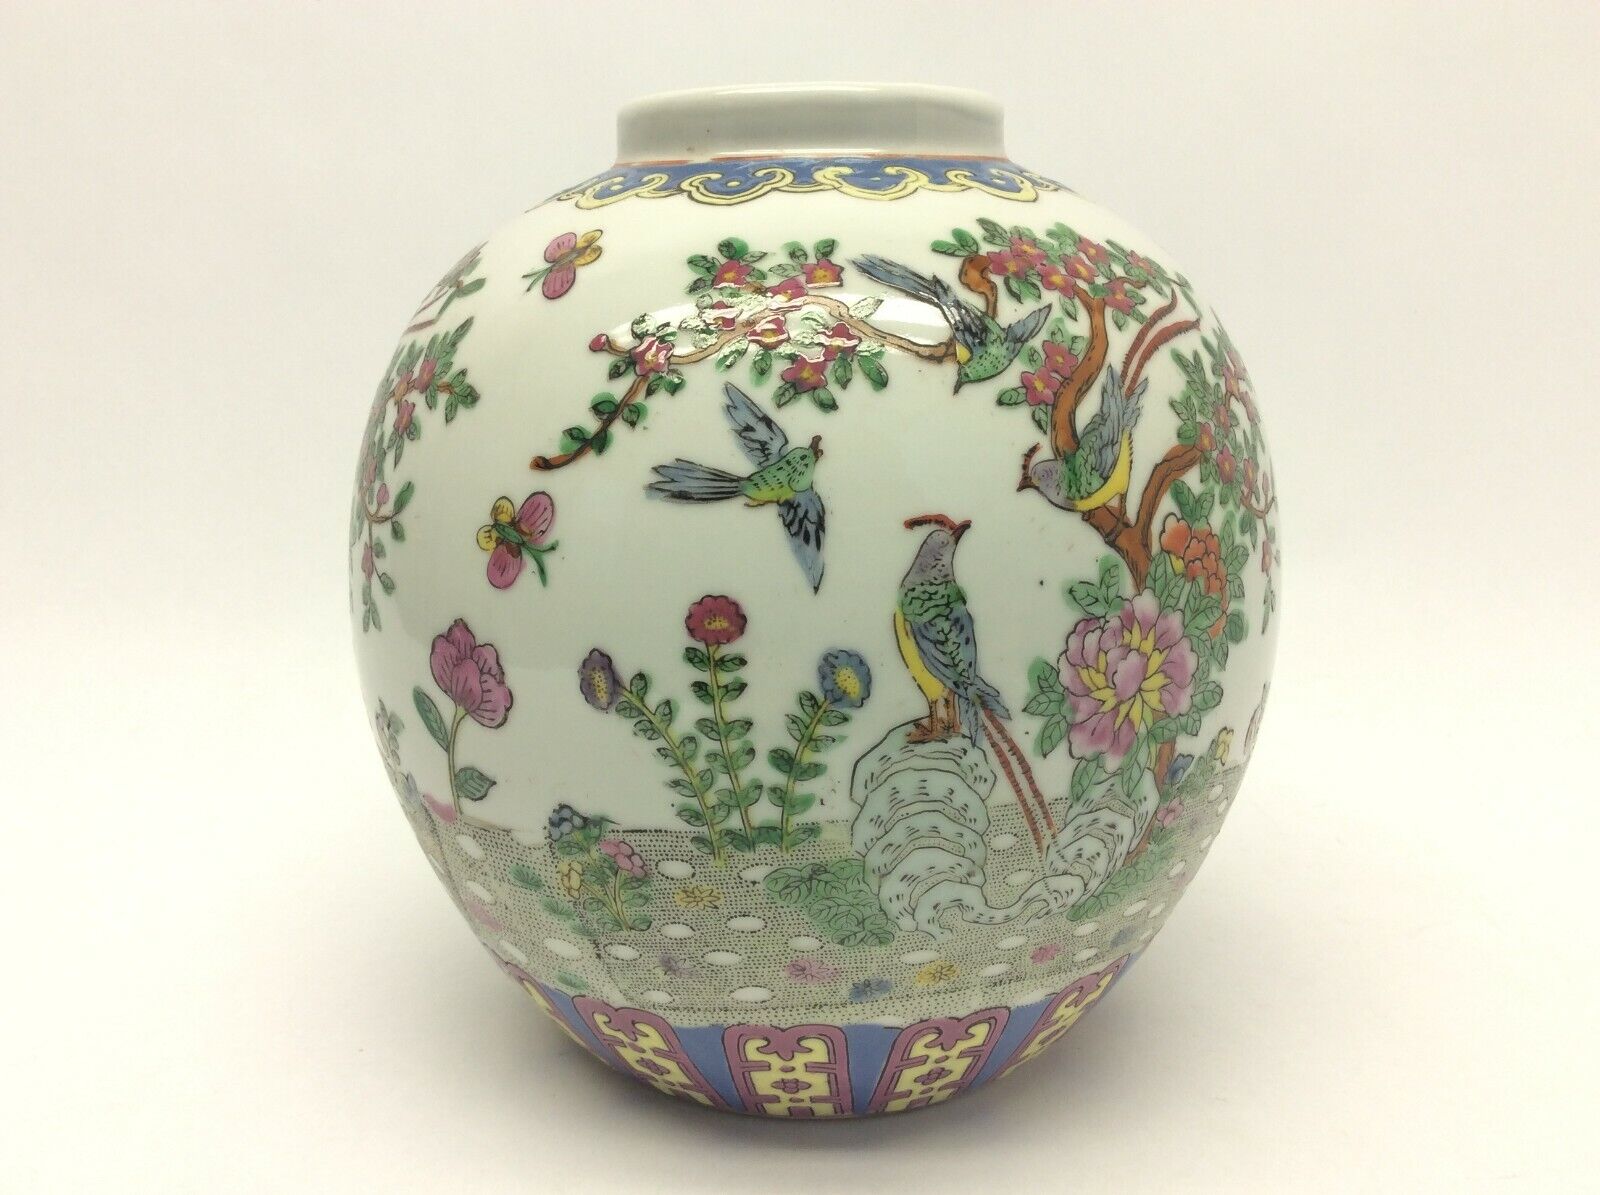 Painted Porcelain Stamped Chinese China Reign Mark Ginger Jar Asian | eBay